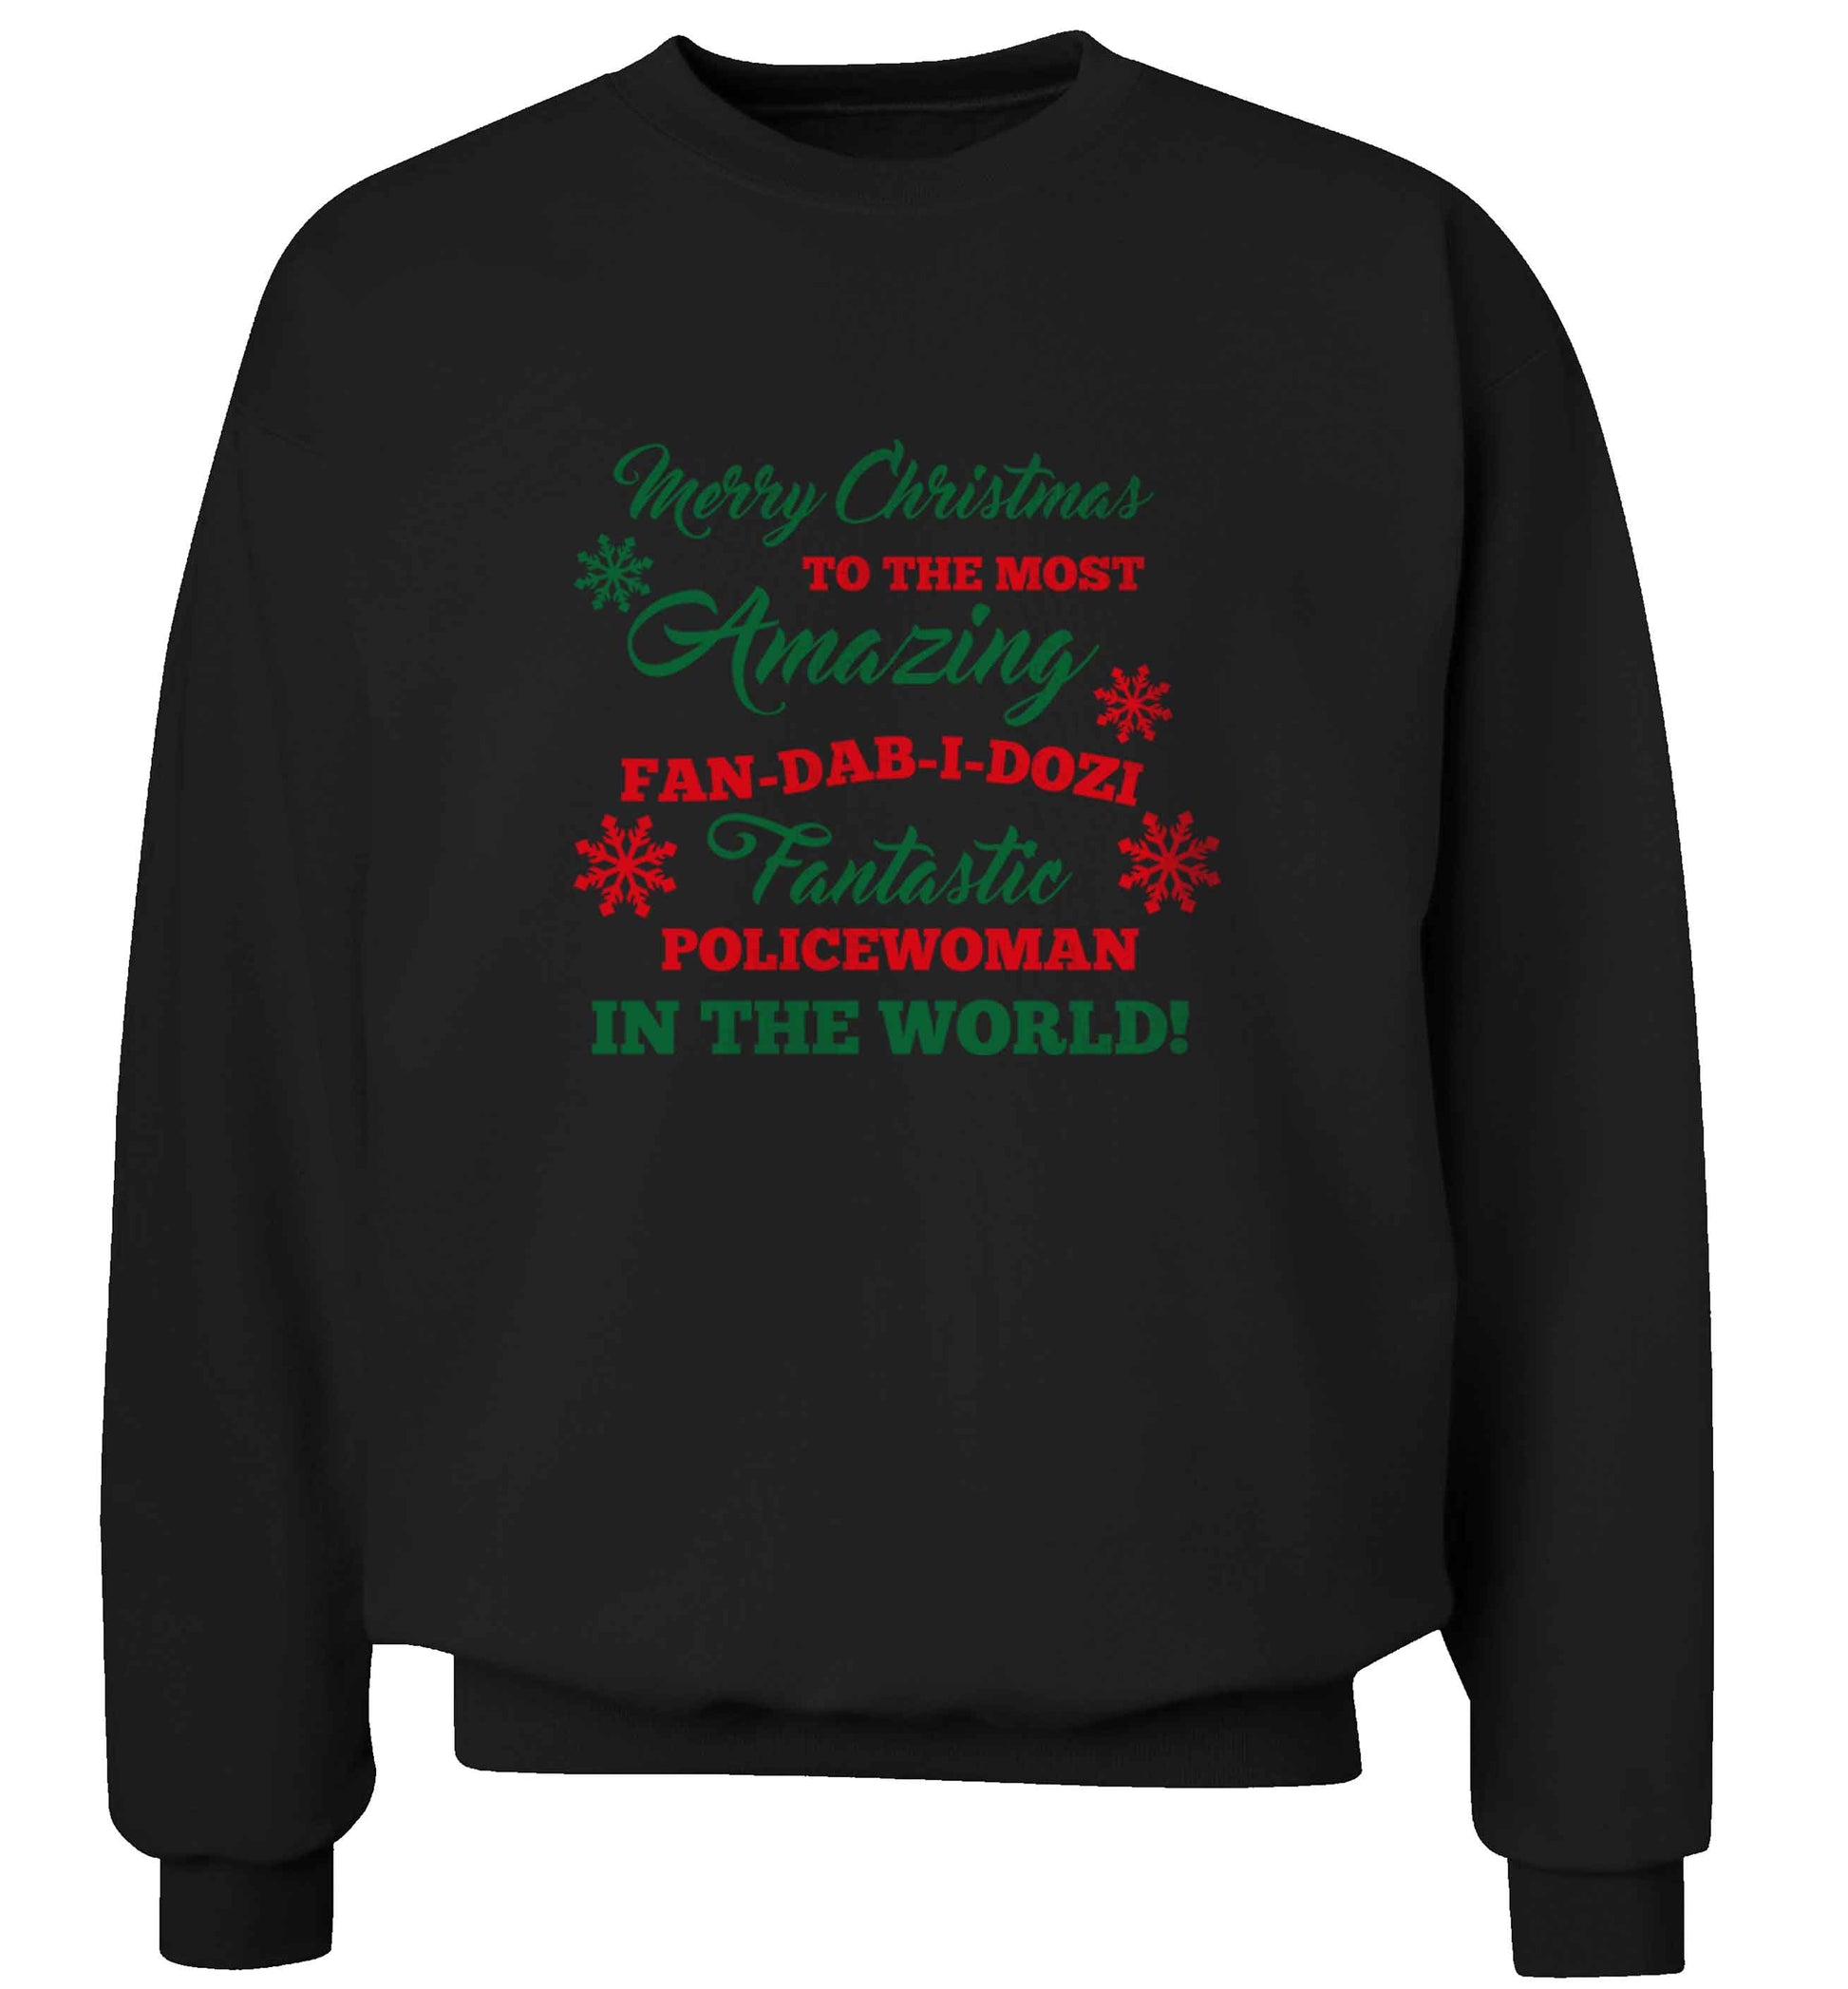 Merry Christmas to the most amazing policewoman in the world! adult's unisex black sweater 2XL